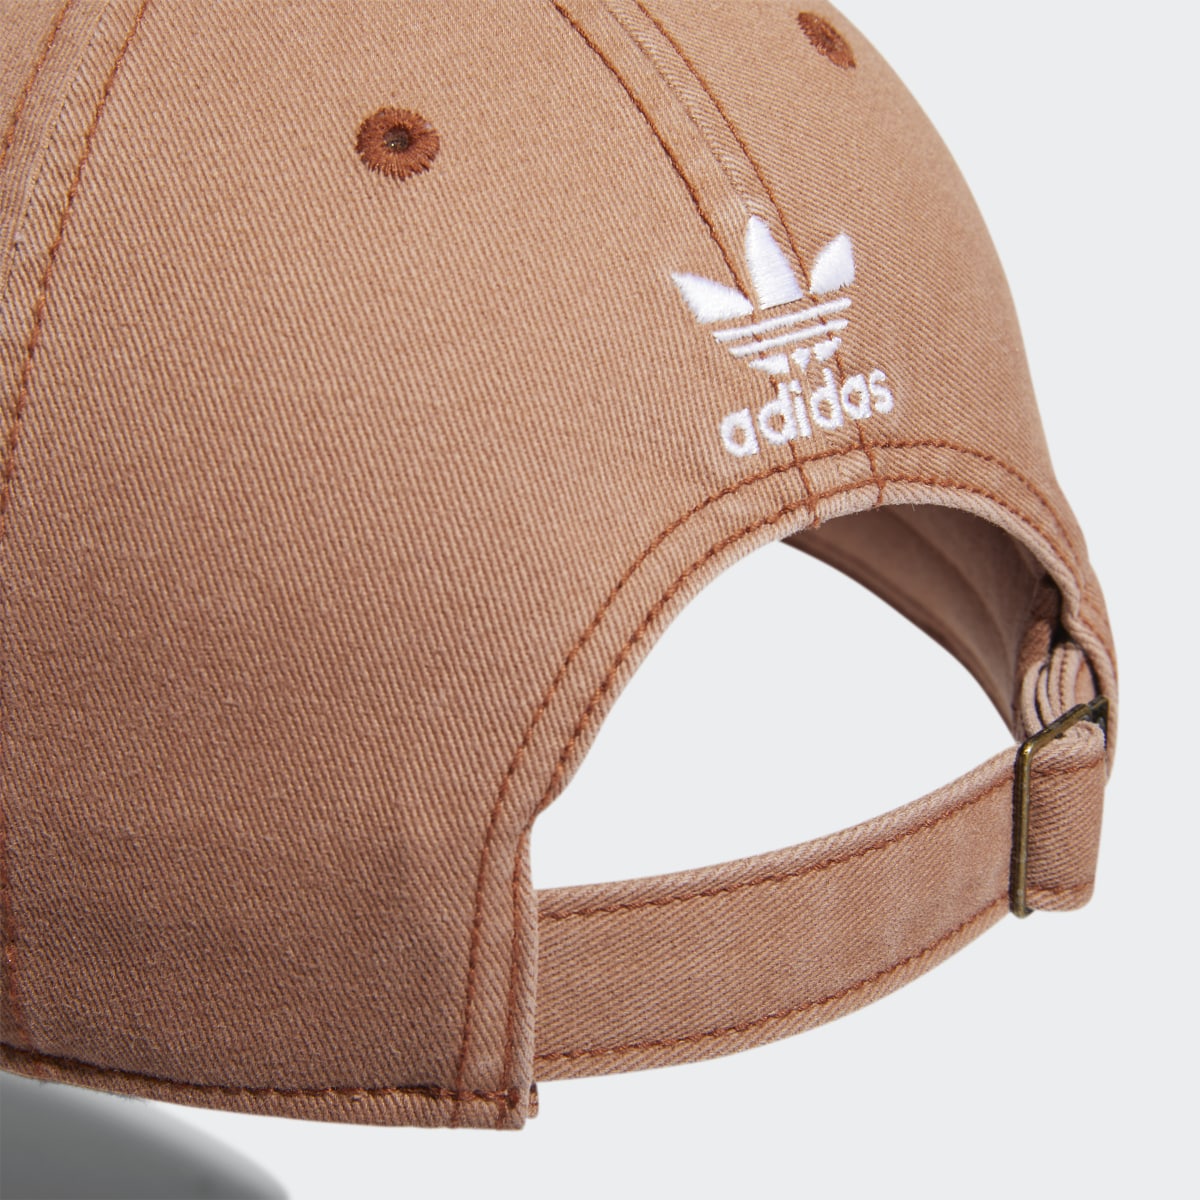 Adidas Relaxed Strap Back Hat. 7